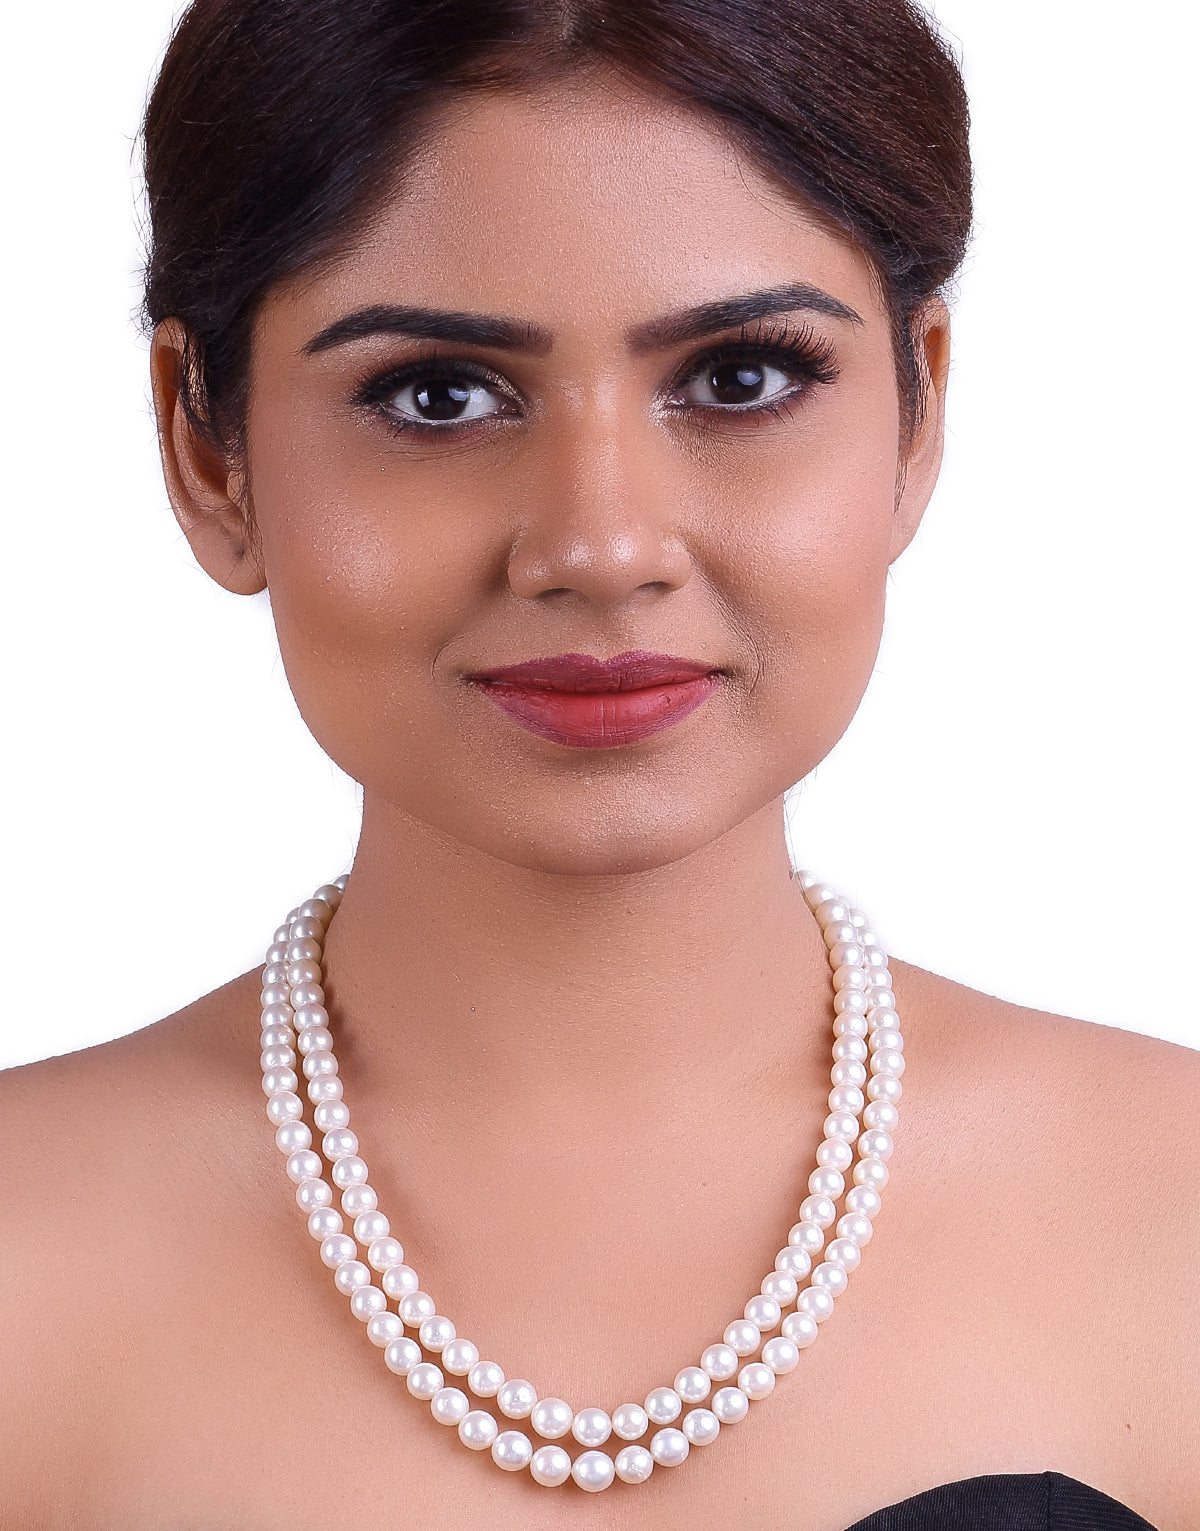 Milky White Saltwater South Sea pearl necklace, 7-8.8mm - AA Quality